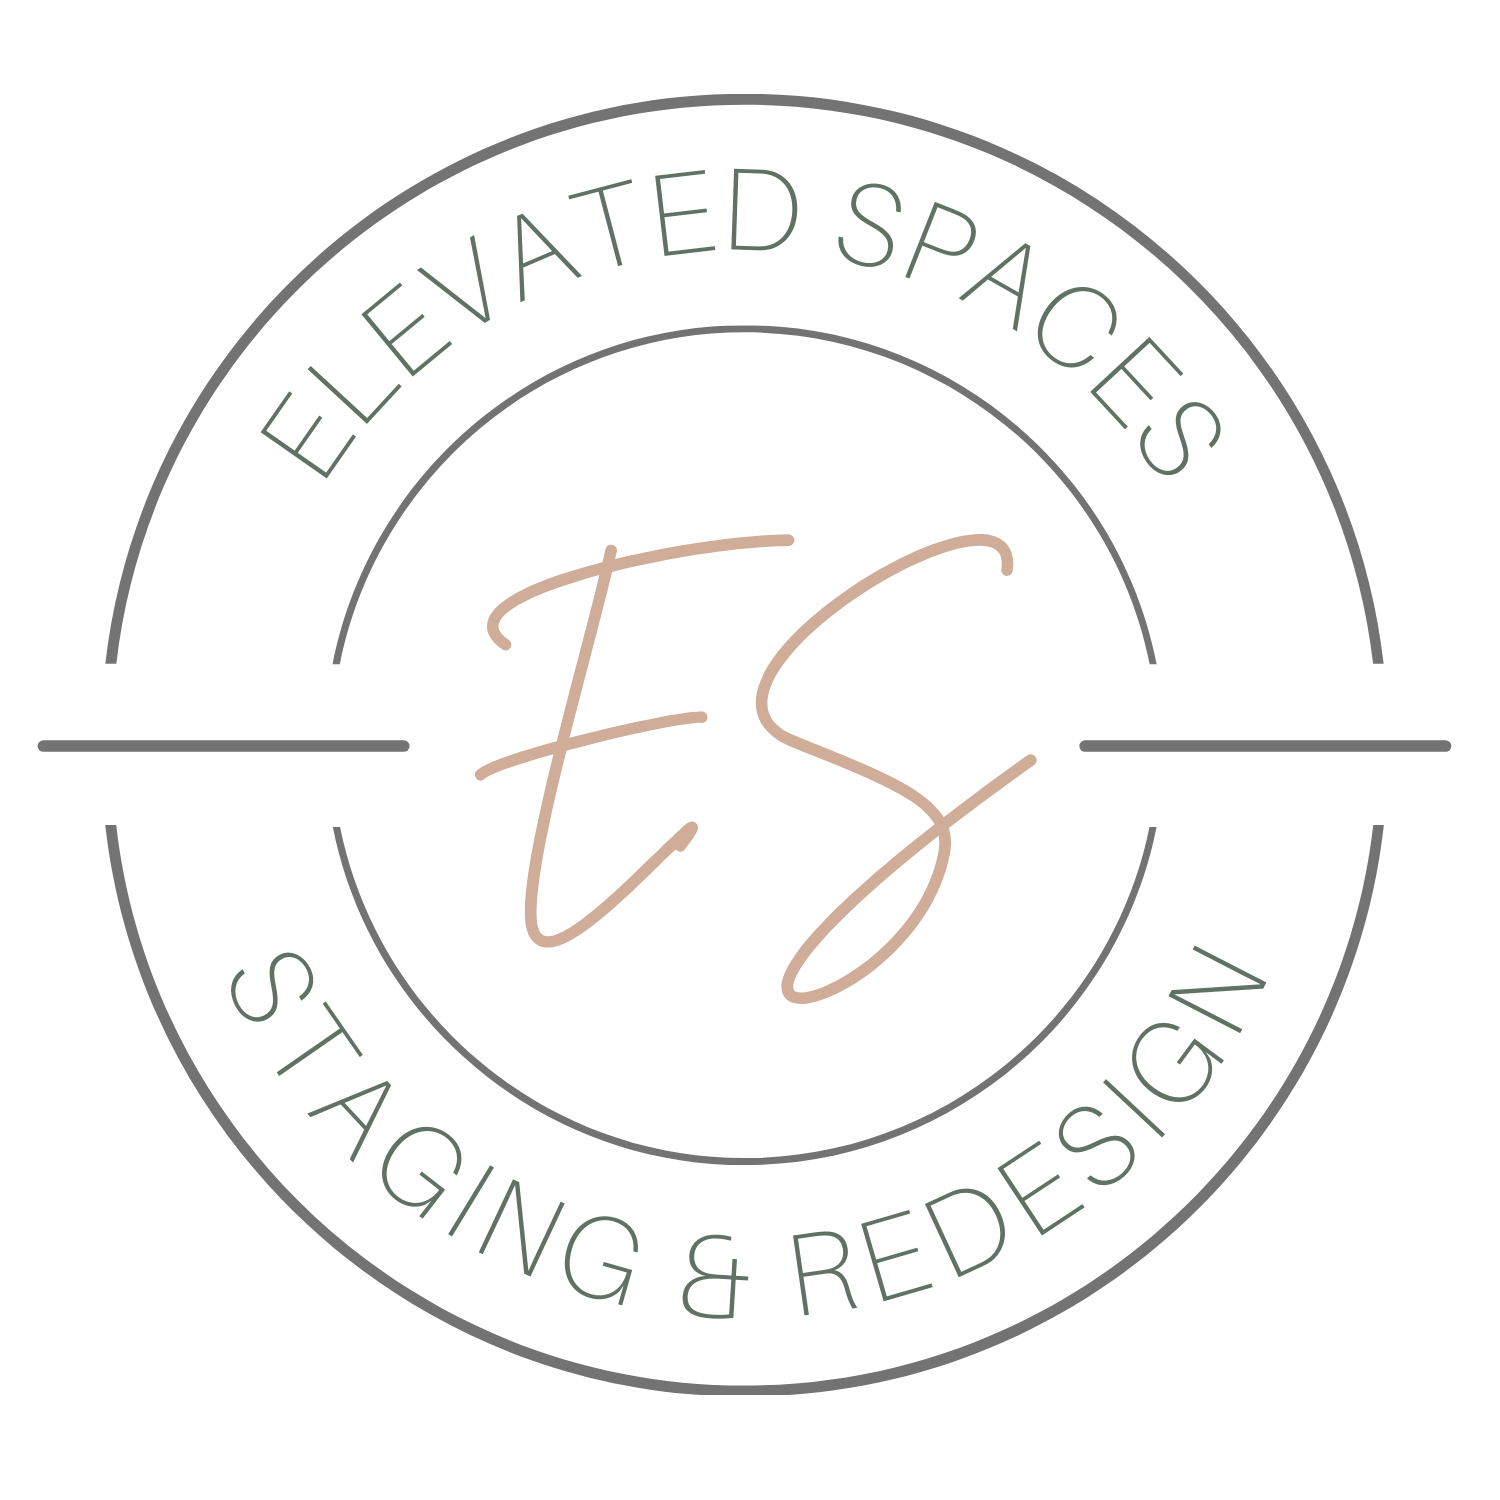 Elevated Spaces Staging and Redesign